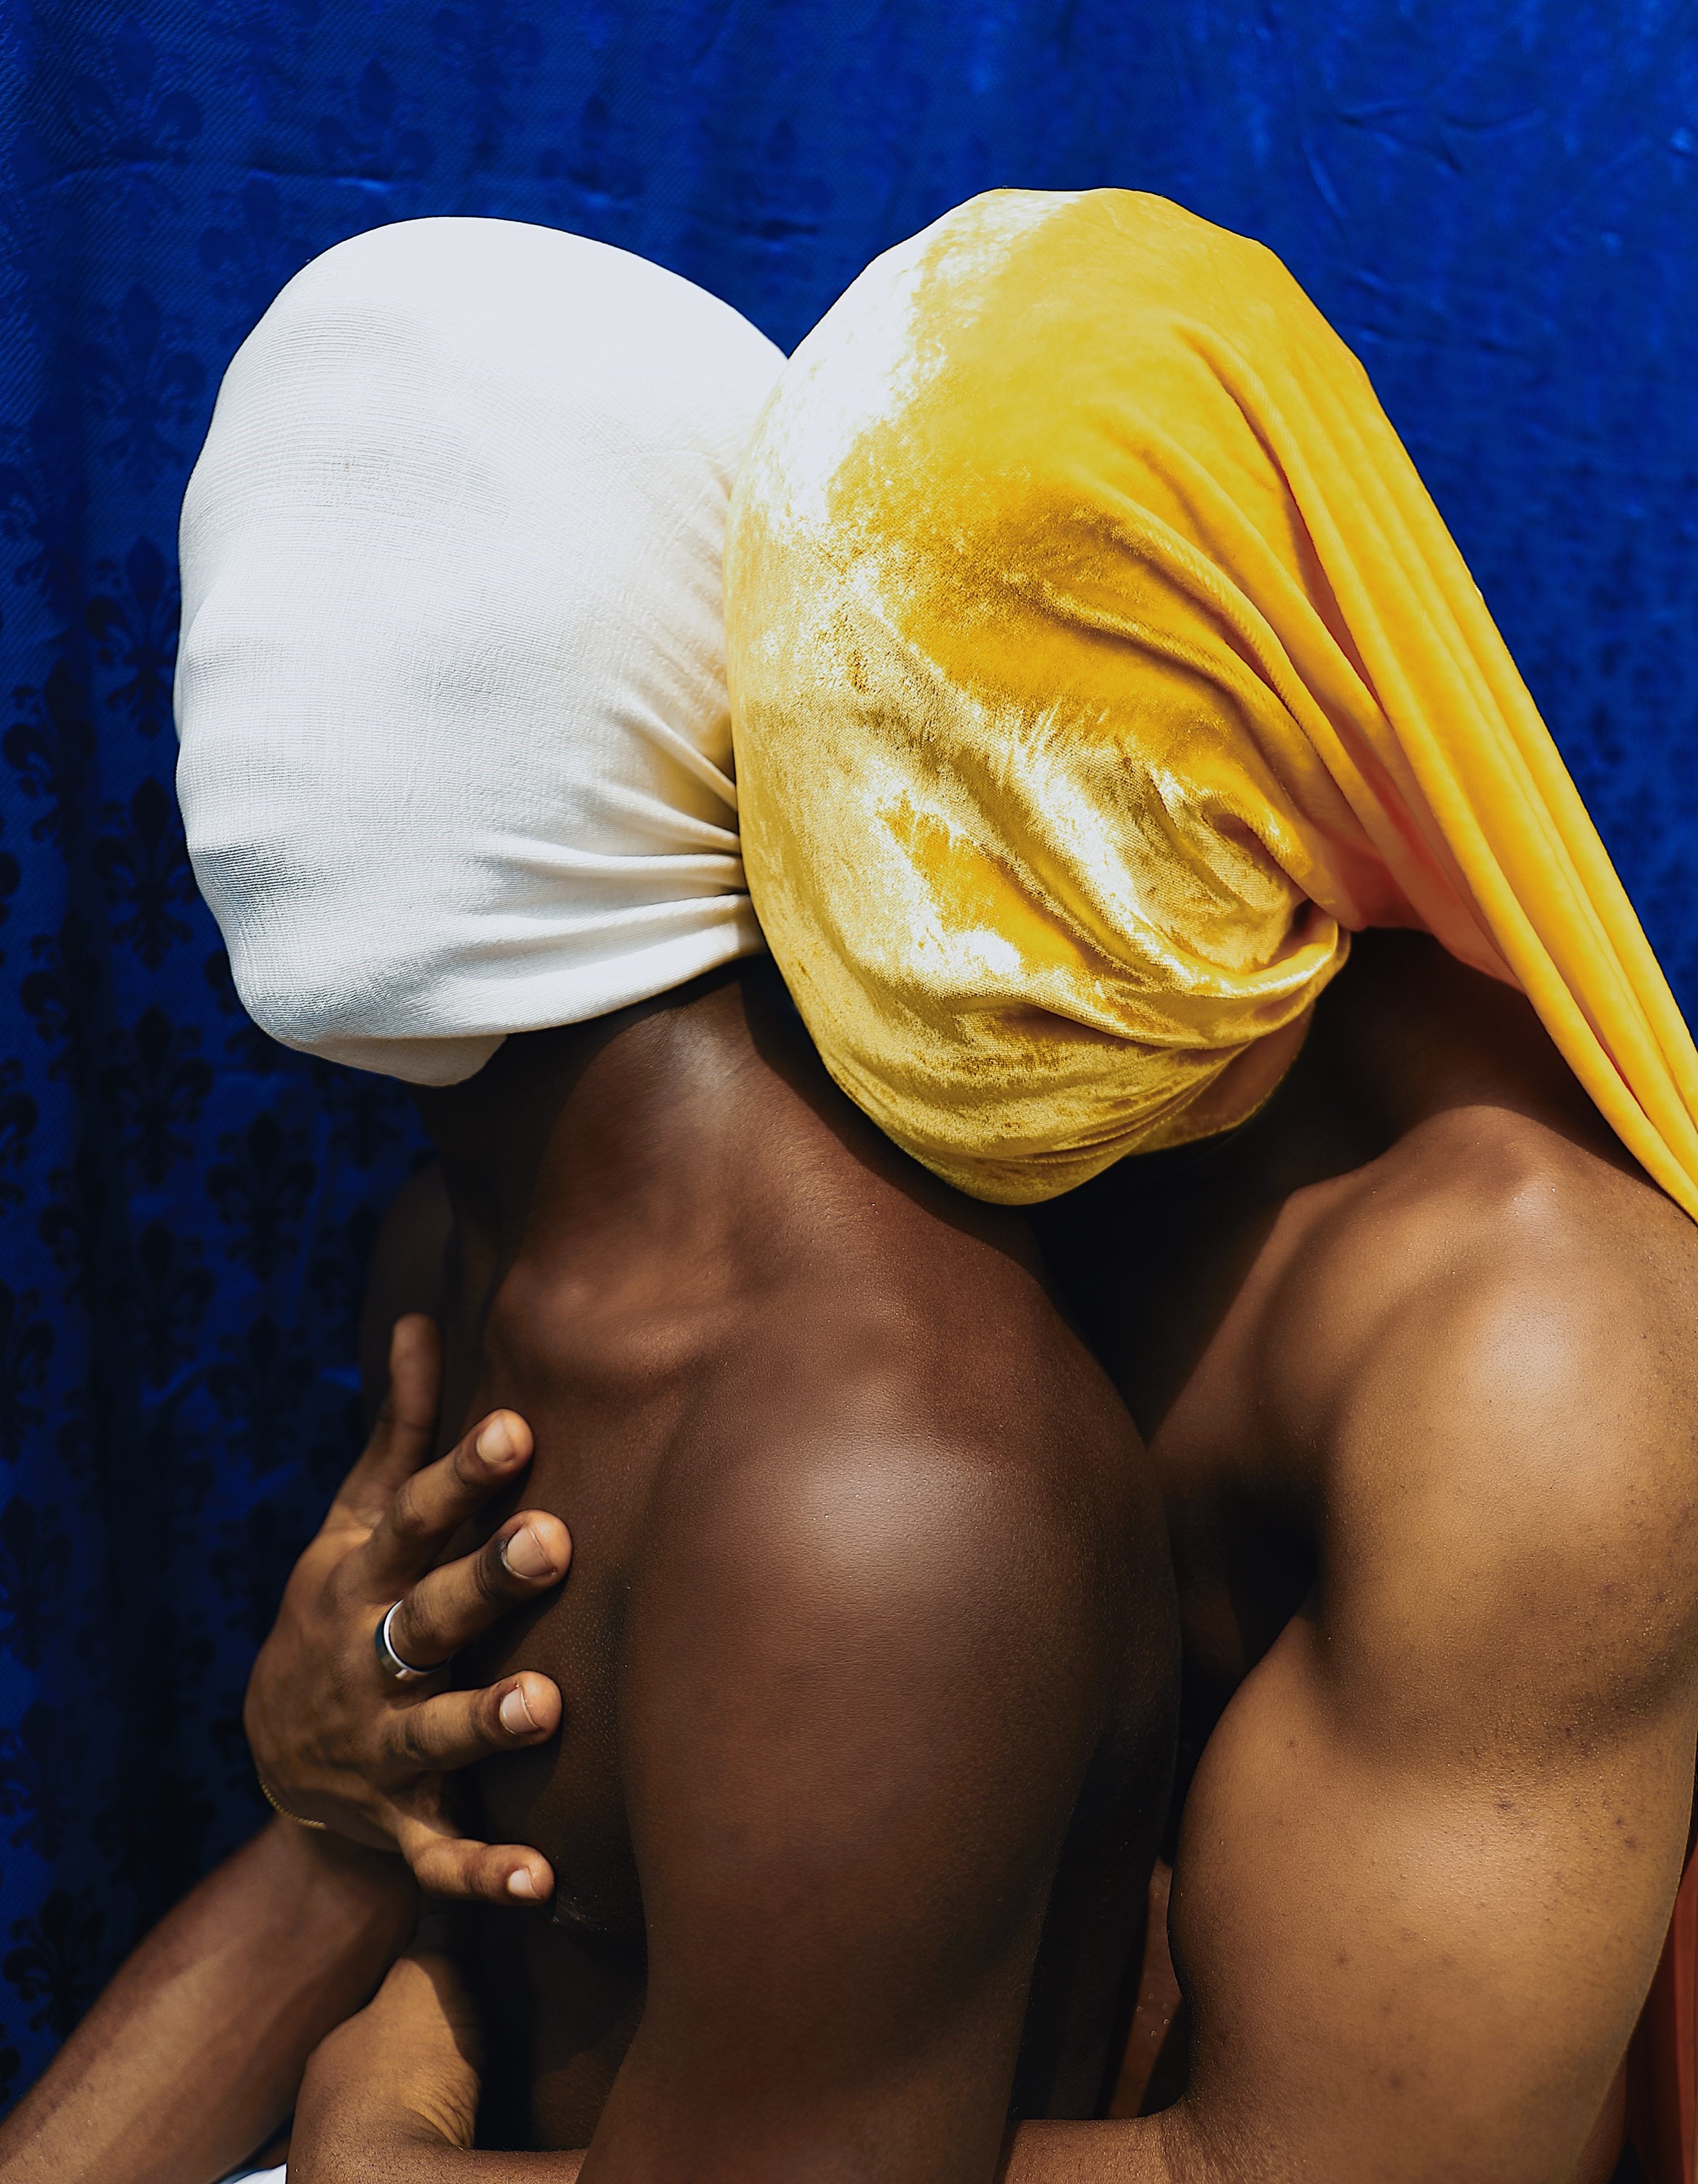 What its like being a gay porn star in Nigeria Dazed